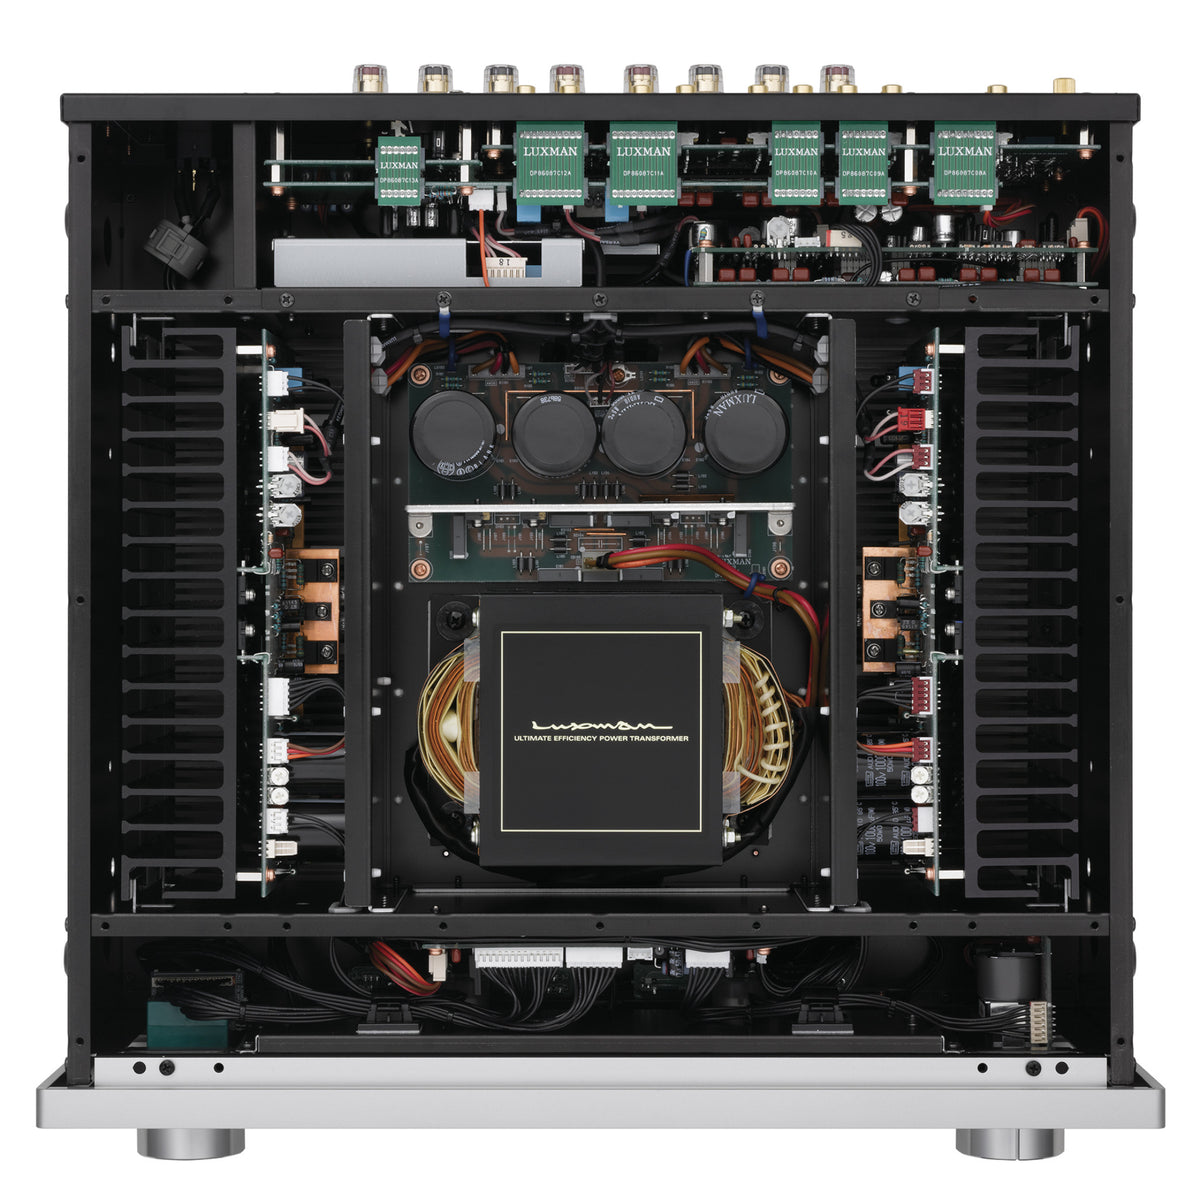 L-550AXII Class A Integrated Amplifier